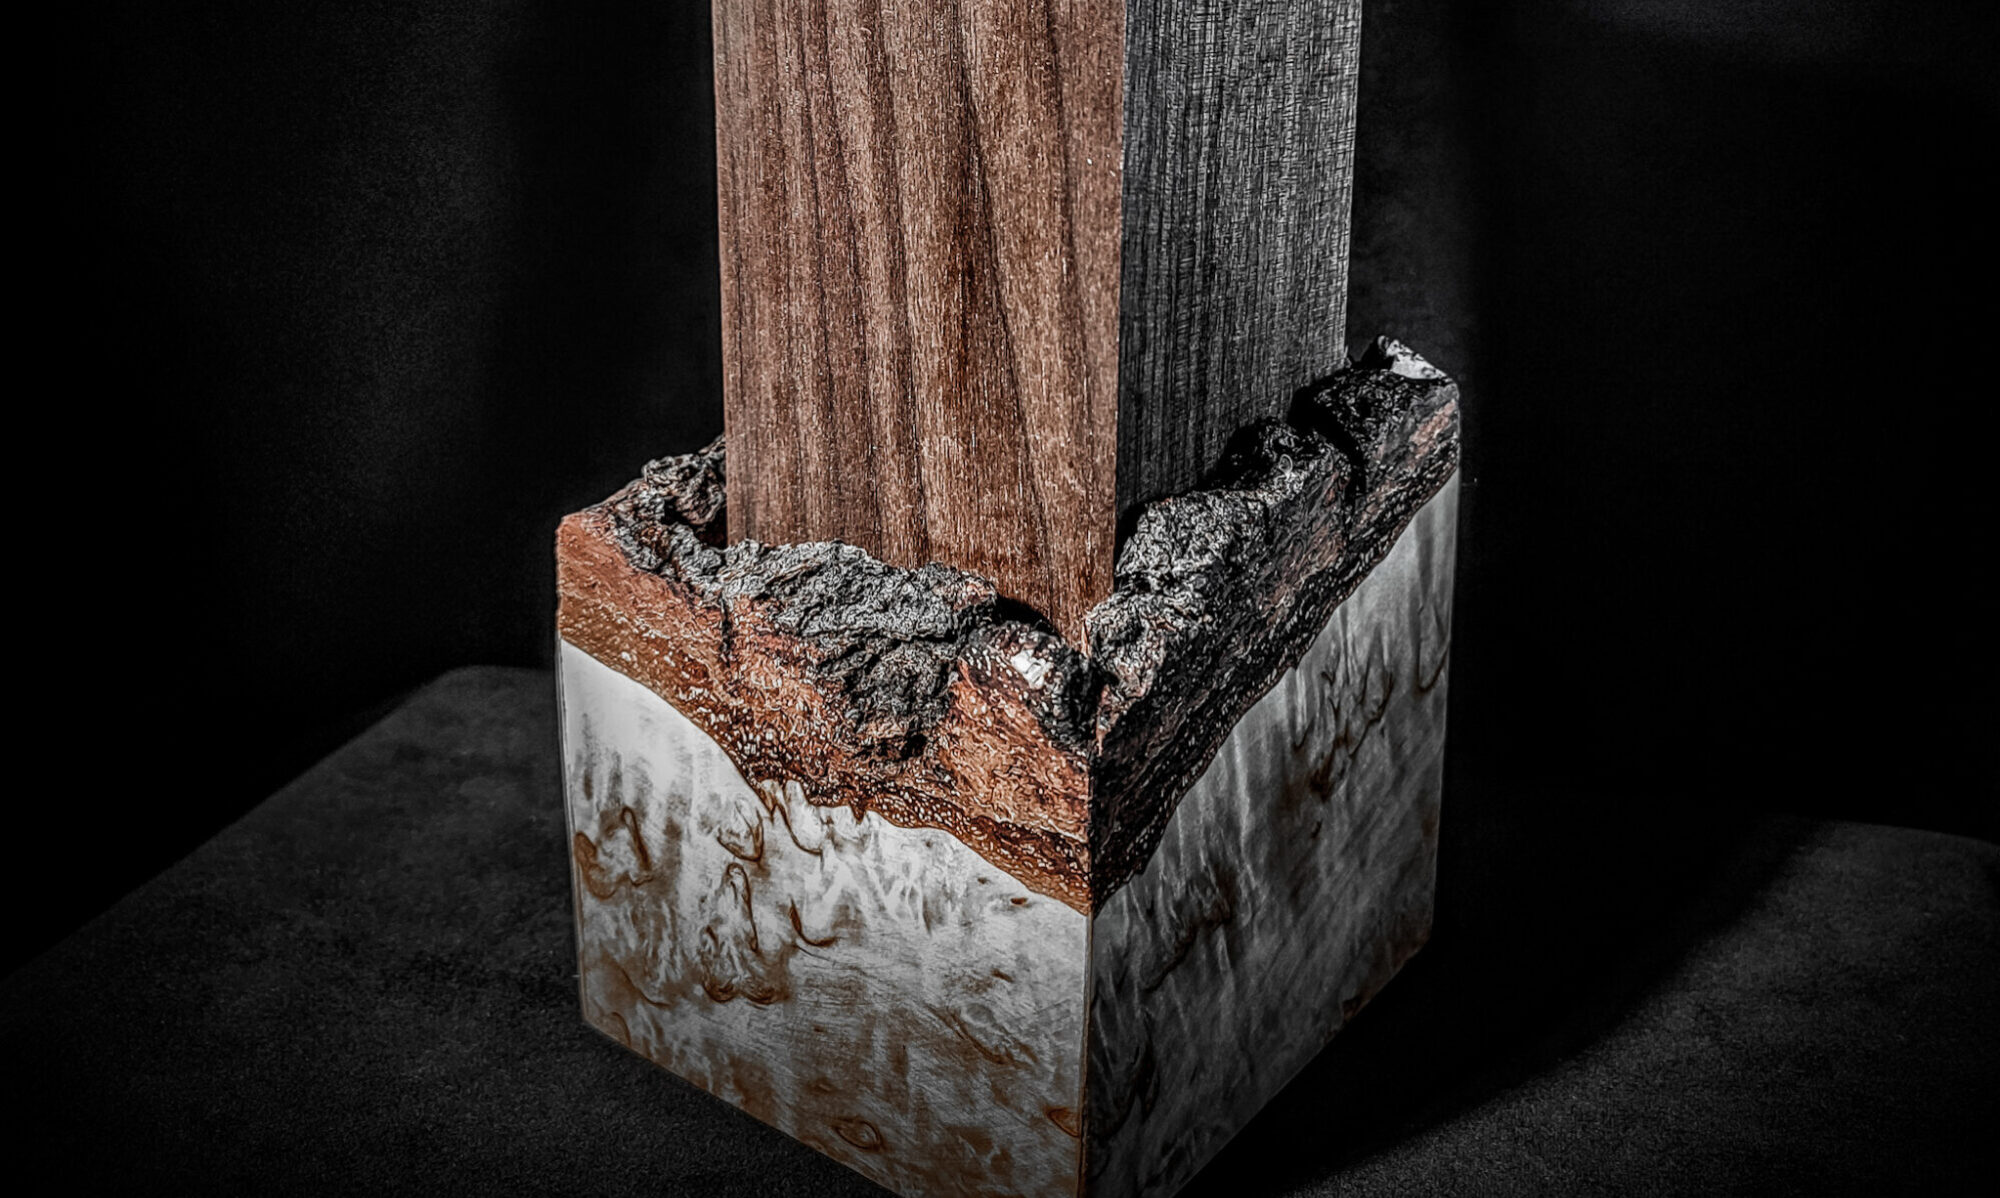 An assortment of beautifully crafted items displayed on a surface, including a decorative Burl Wood Bowl, intricately designed Cutting Boards, and elegant keepsake urns. The rich textures and natural patterns of the burl wood add a touch of sophistication to the collection, showcasing the artistry and craftsmanship of these unique and functional pieces